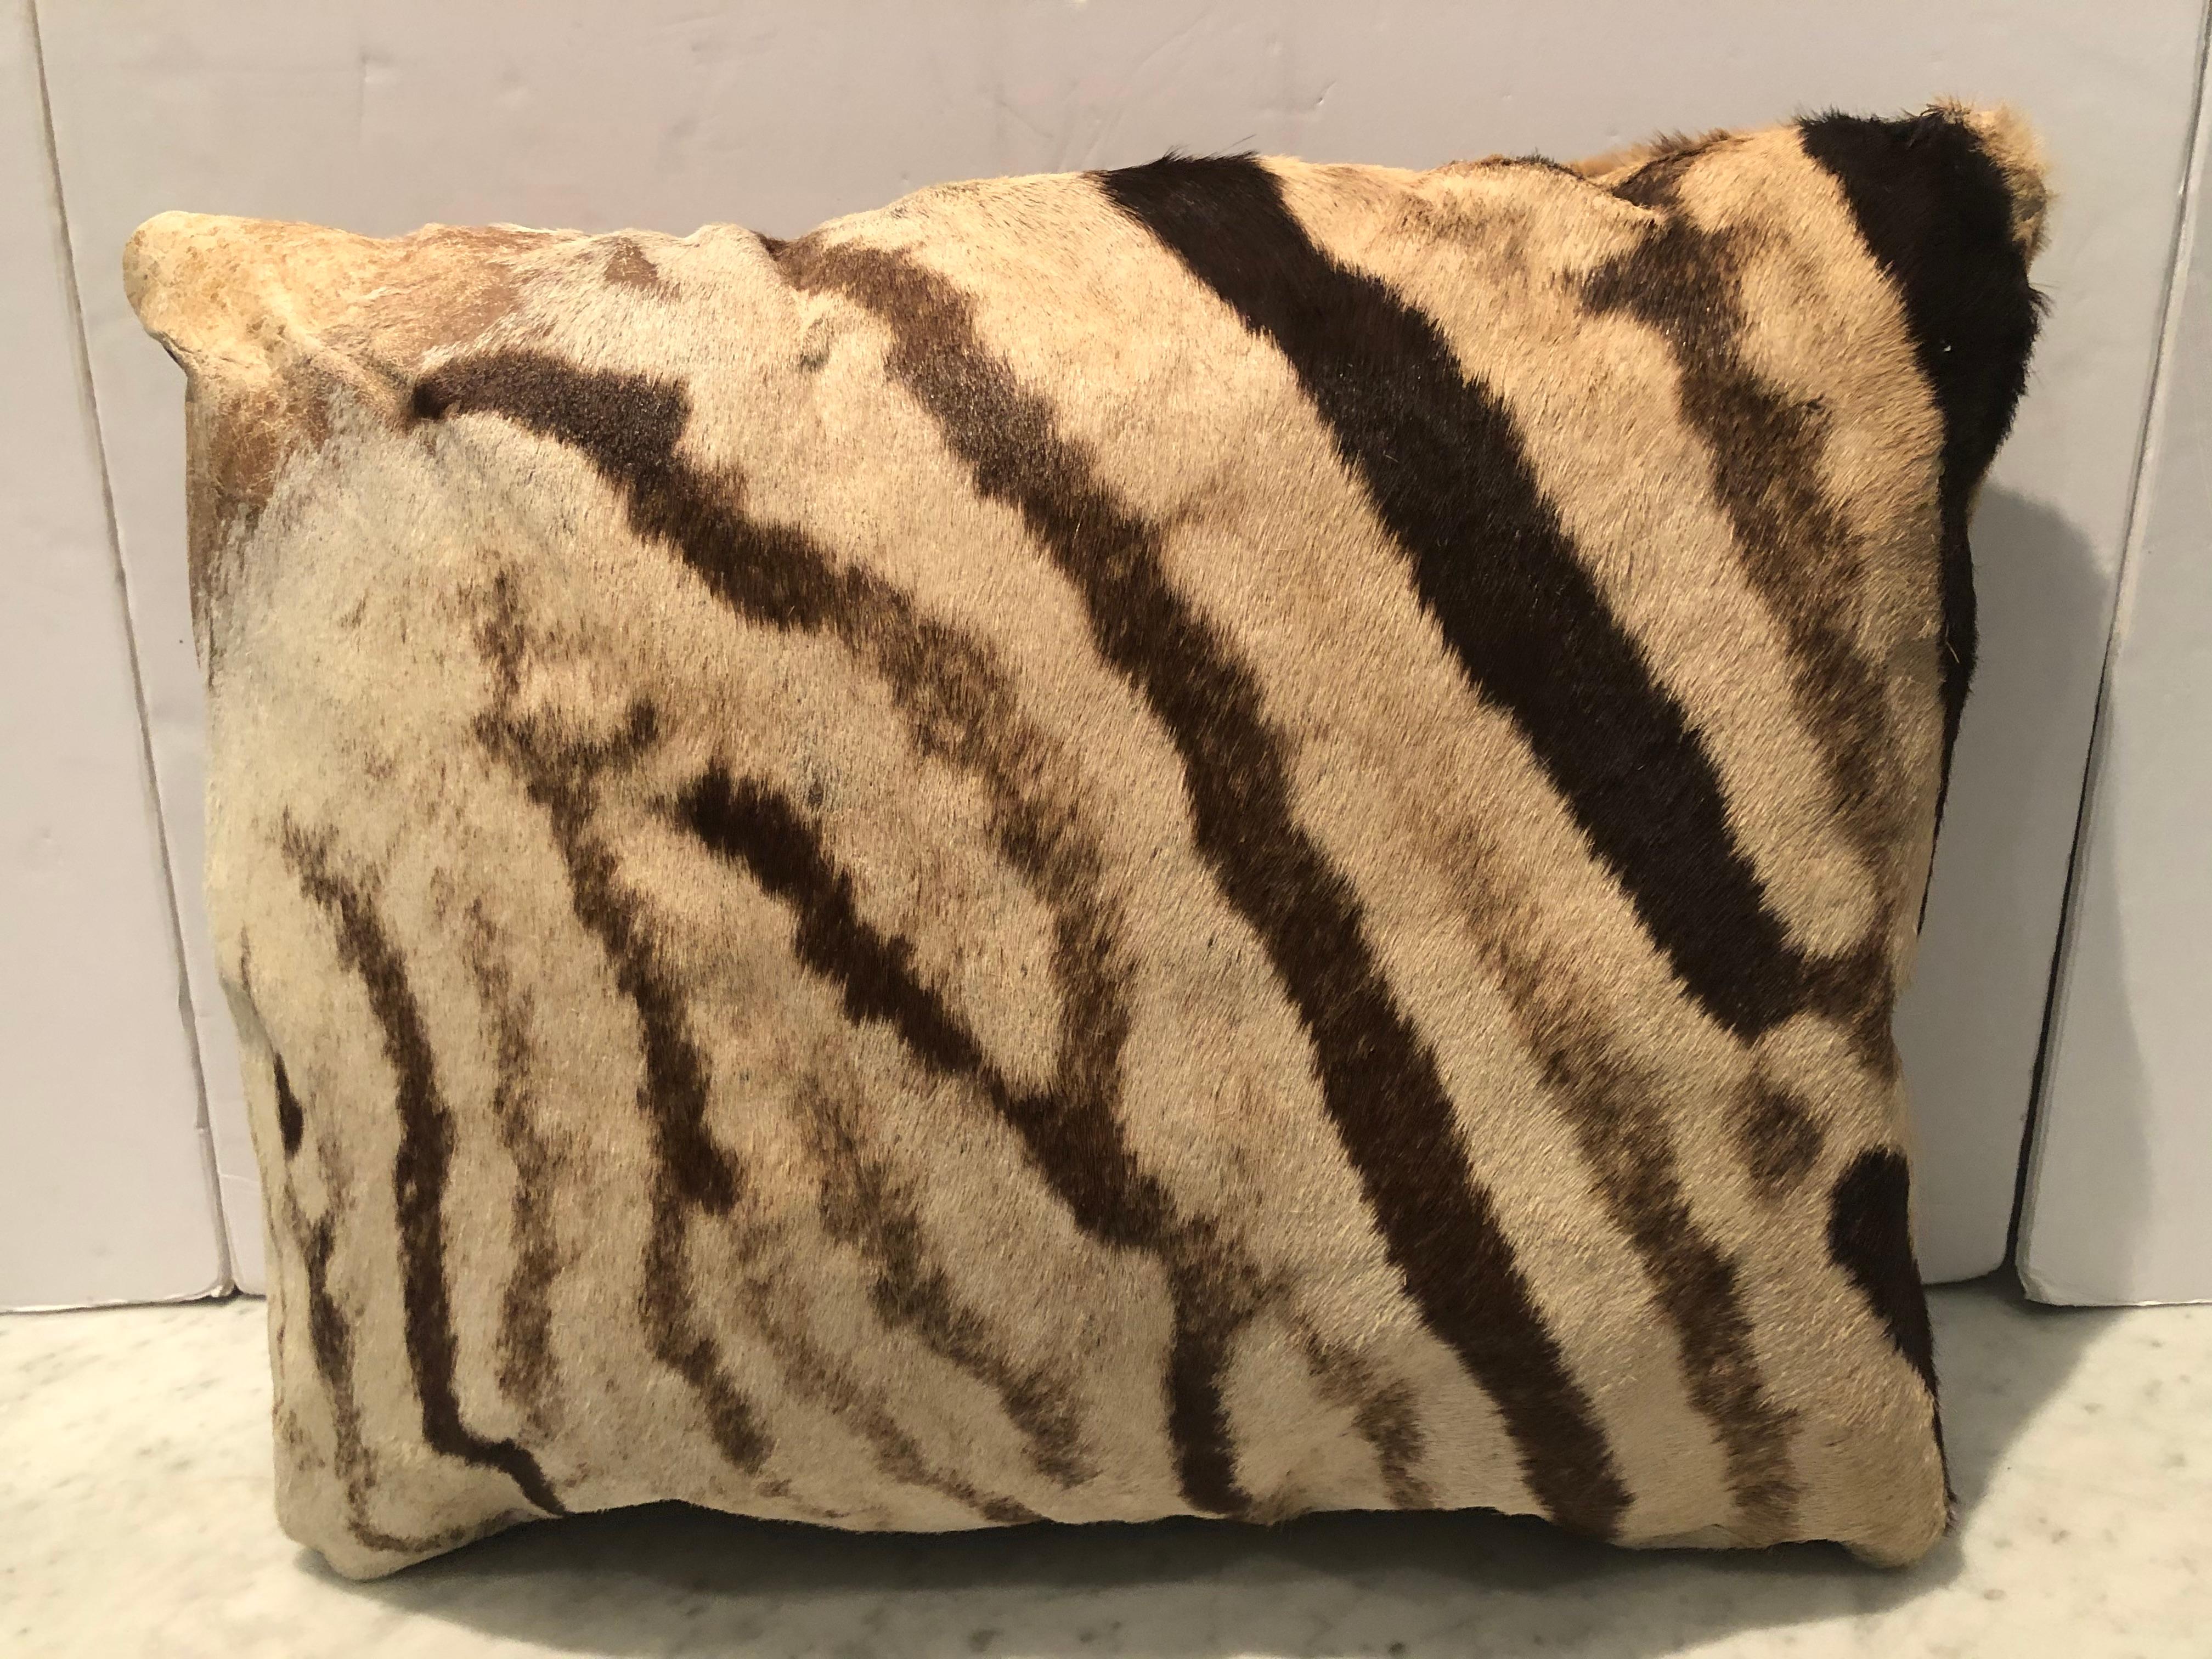 Pair of custom vintage burchell zebra hide pillows with brown leather backs. Pillows are handmade and filled with an insert of down and synthetics. Zipper closure. Measurements are 23” W x 10” D x 17” H and 20” W x 9” D x 15.5” H.